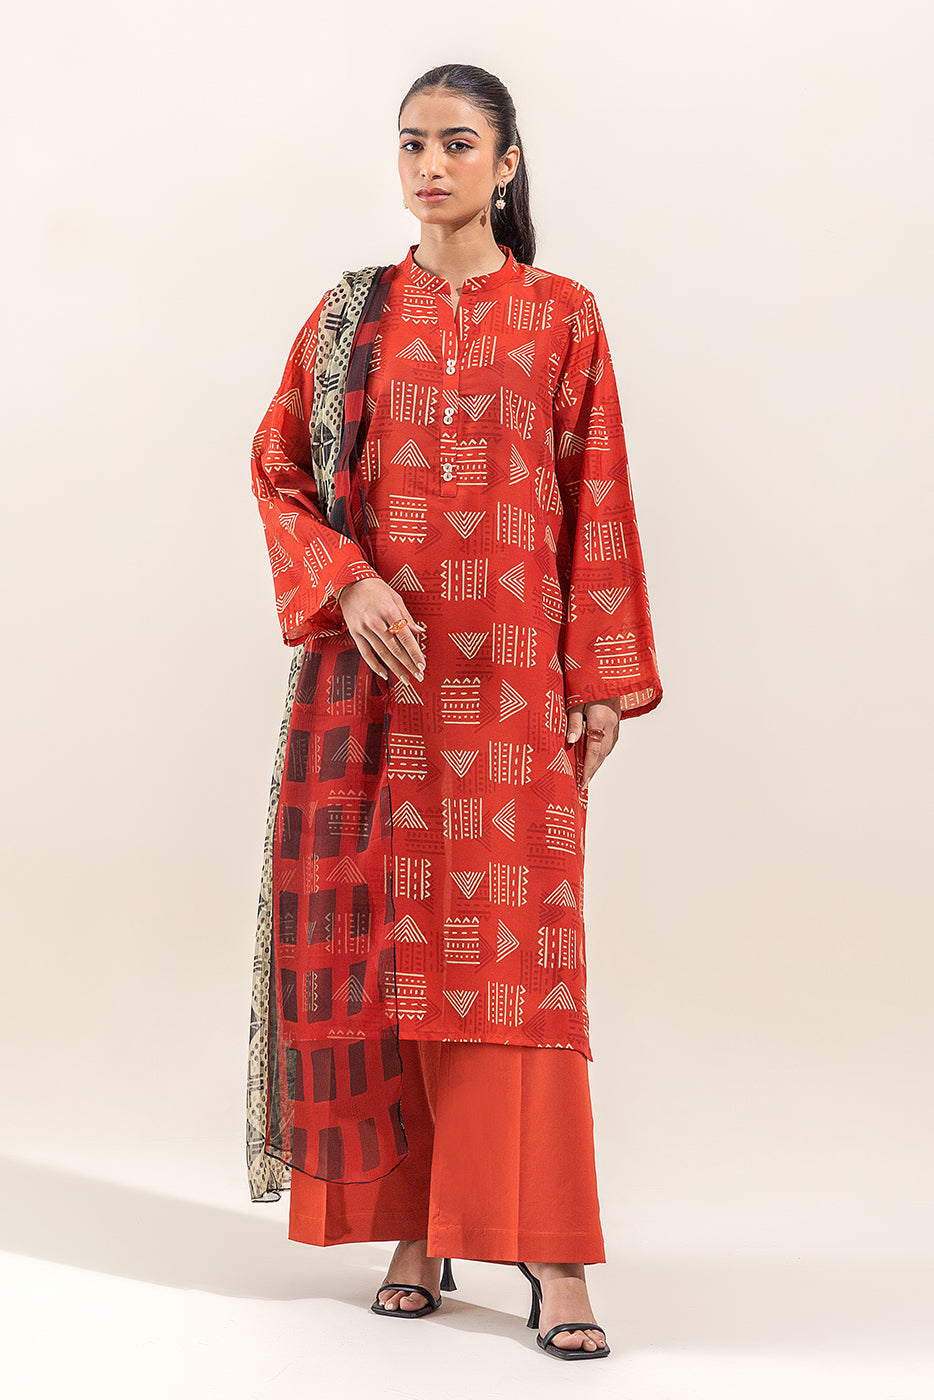 3 PIECE PRINTED LAWN SUIT-TANGERINE FUN (UNSTITCHED) - BEECHTREE